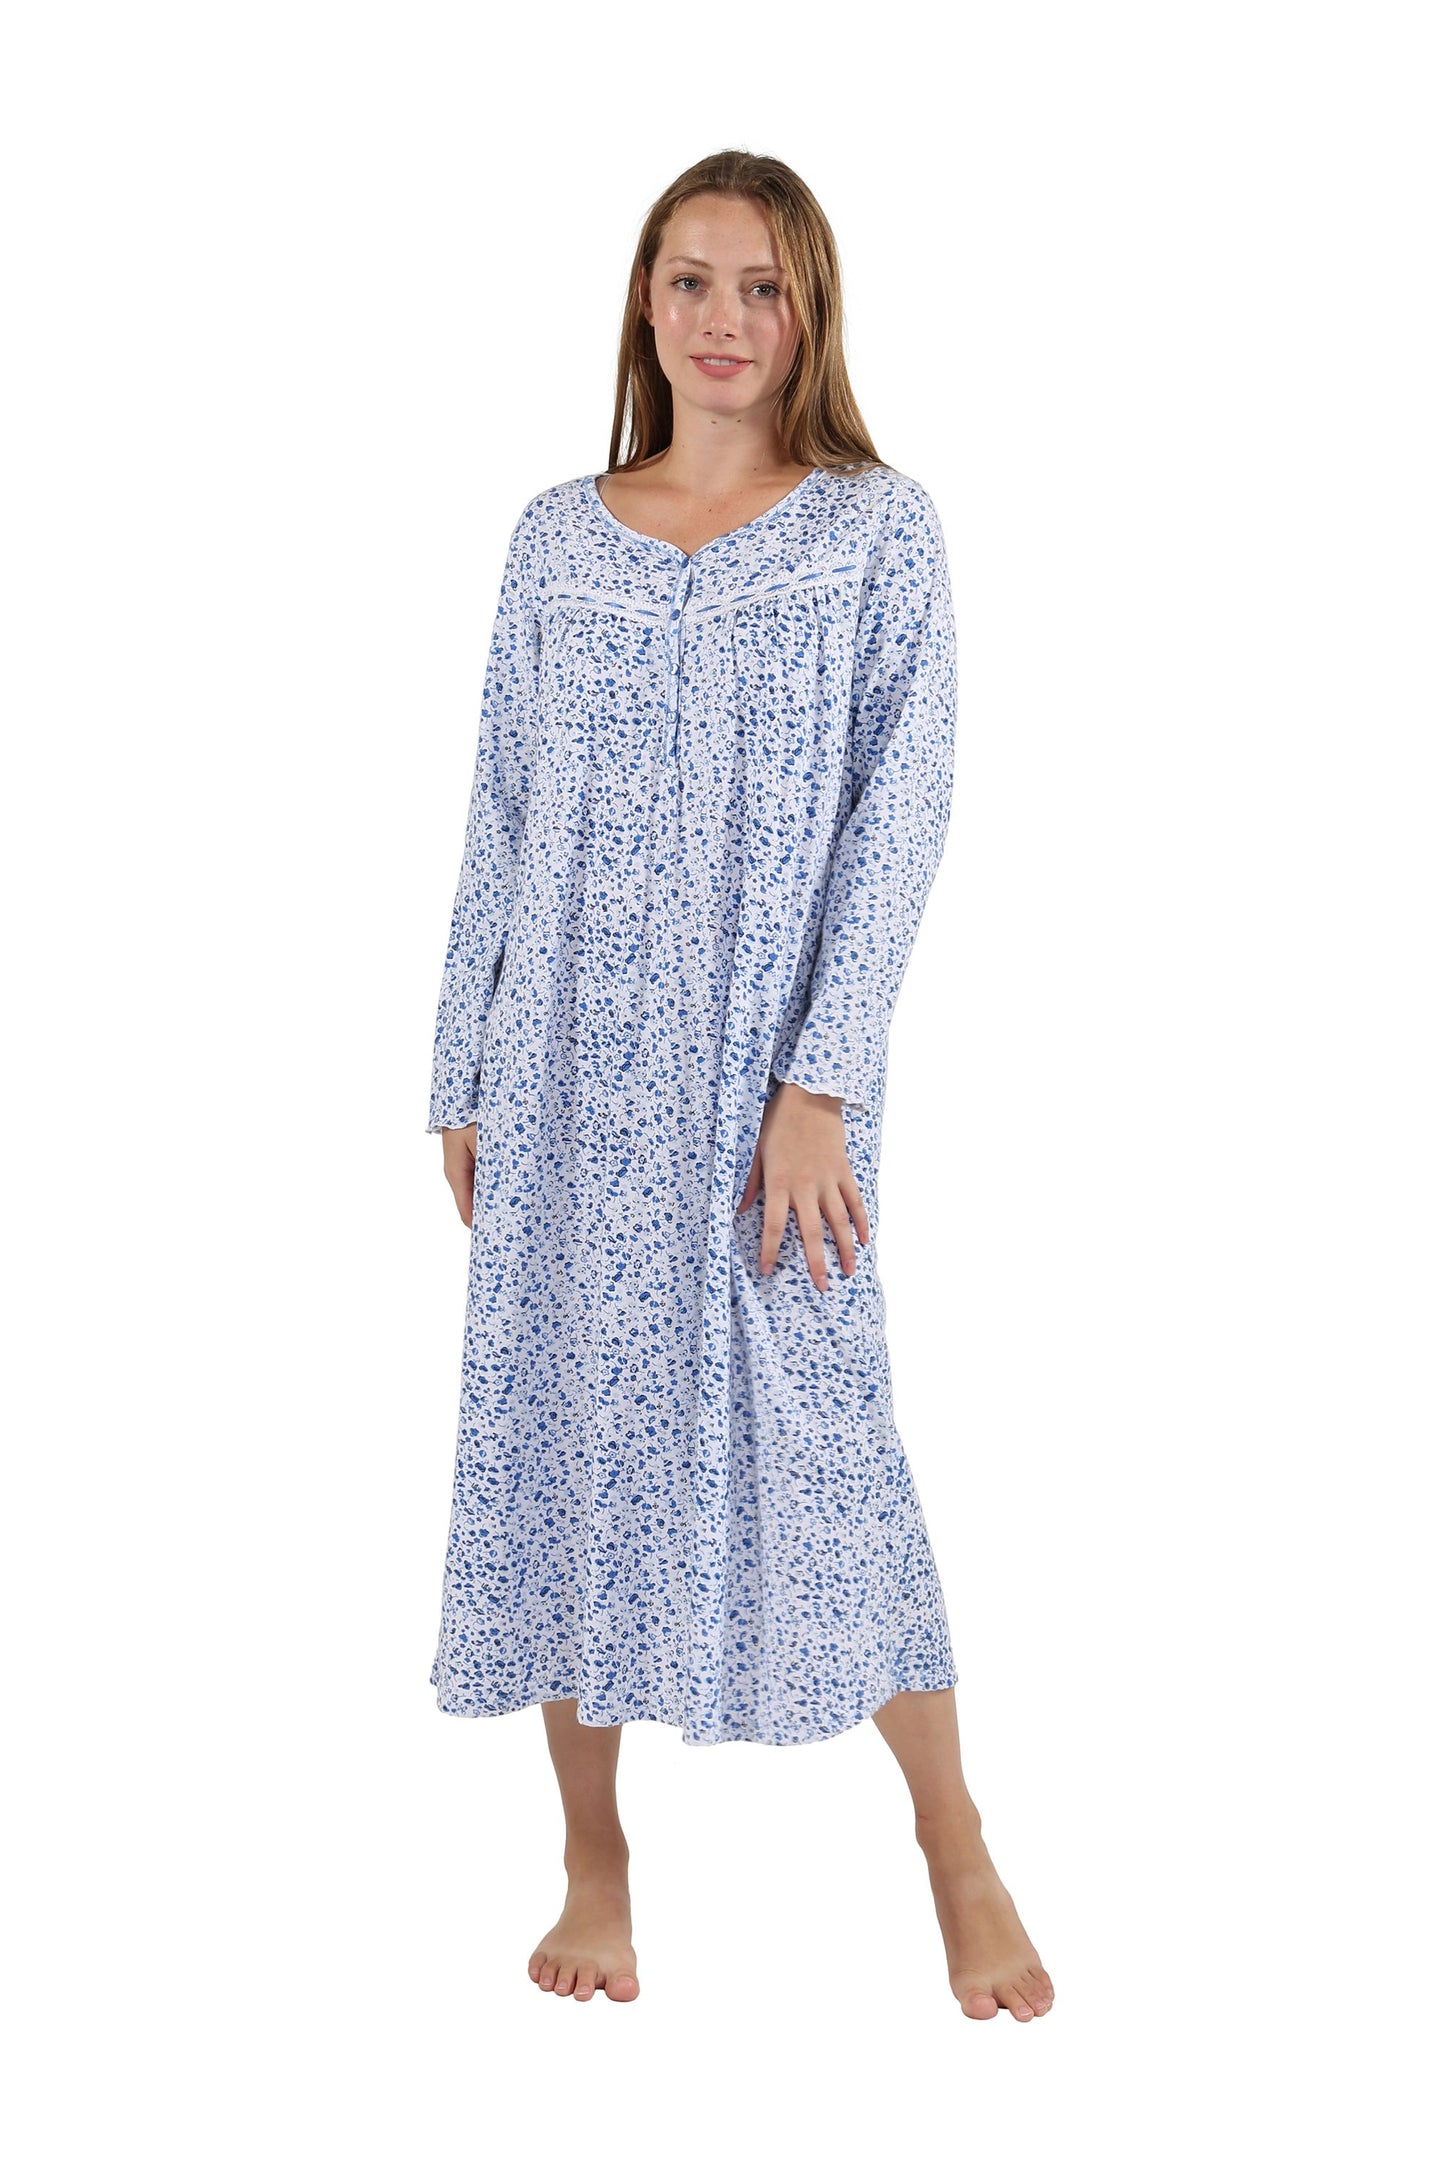 100% Cotton Knit Mid-Length Nightgown 1530G - Blue Floral